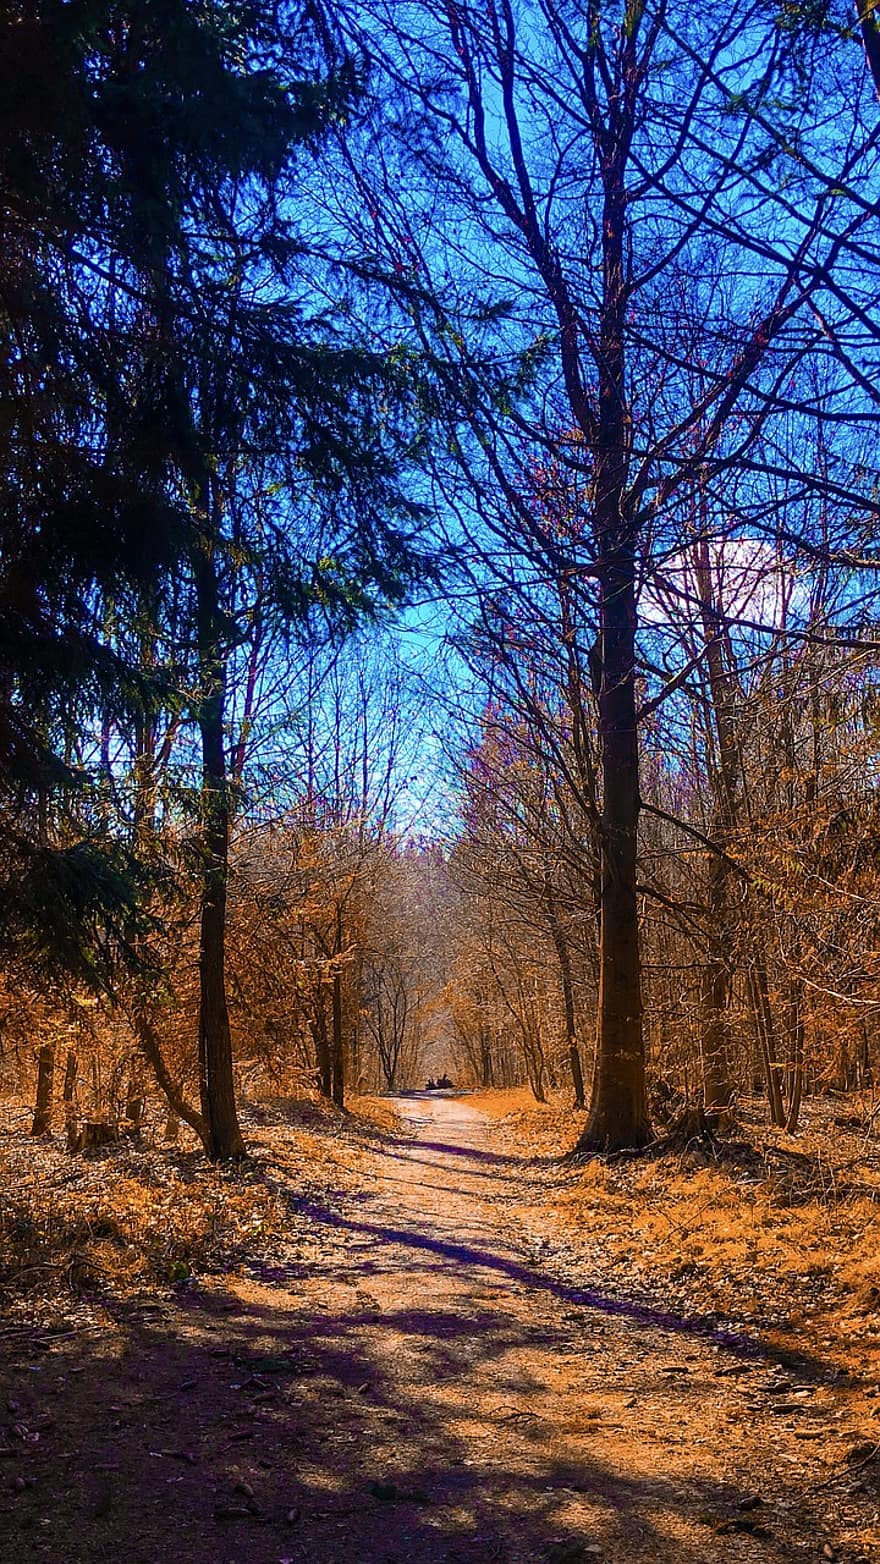 Path, Forest, Fall, Trail, Autumn, Trees, Road, Dirt Road, Woods, Nature, tree